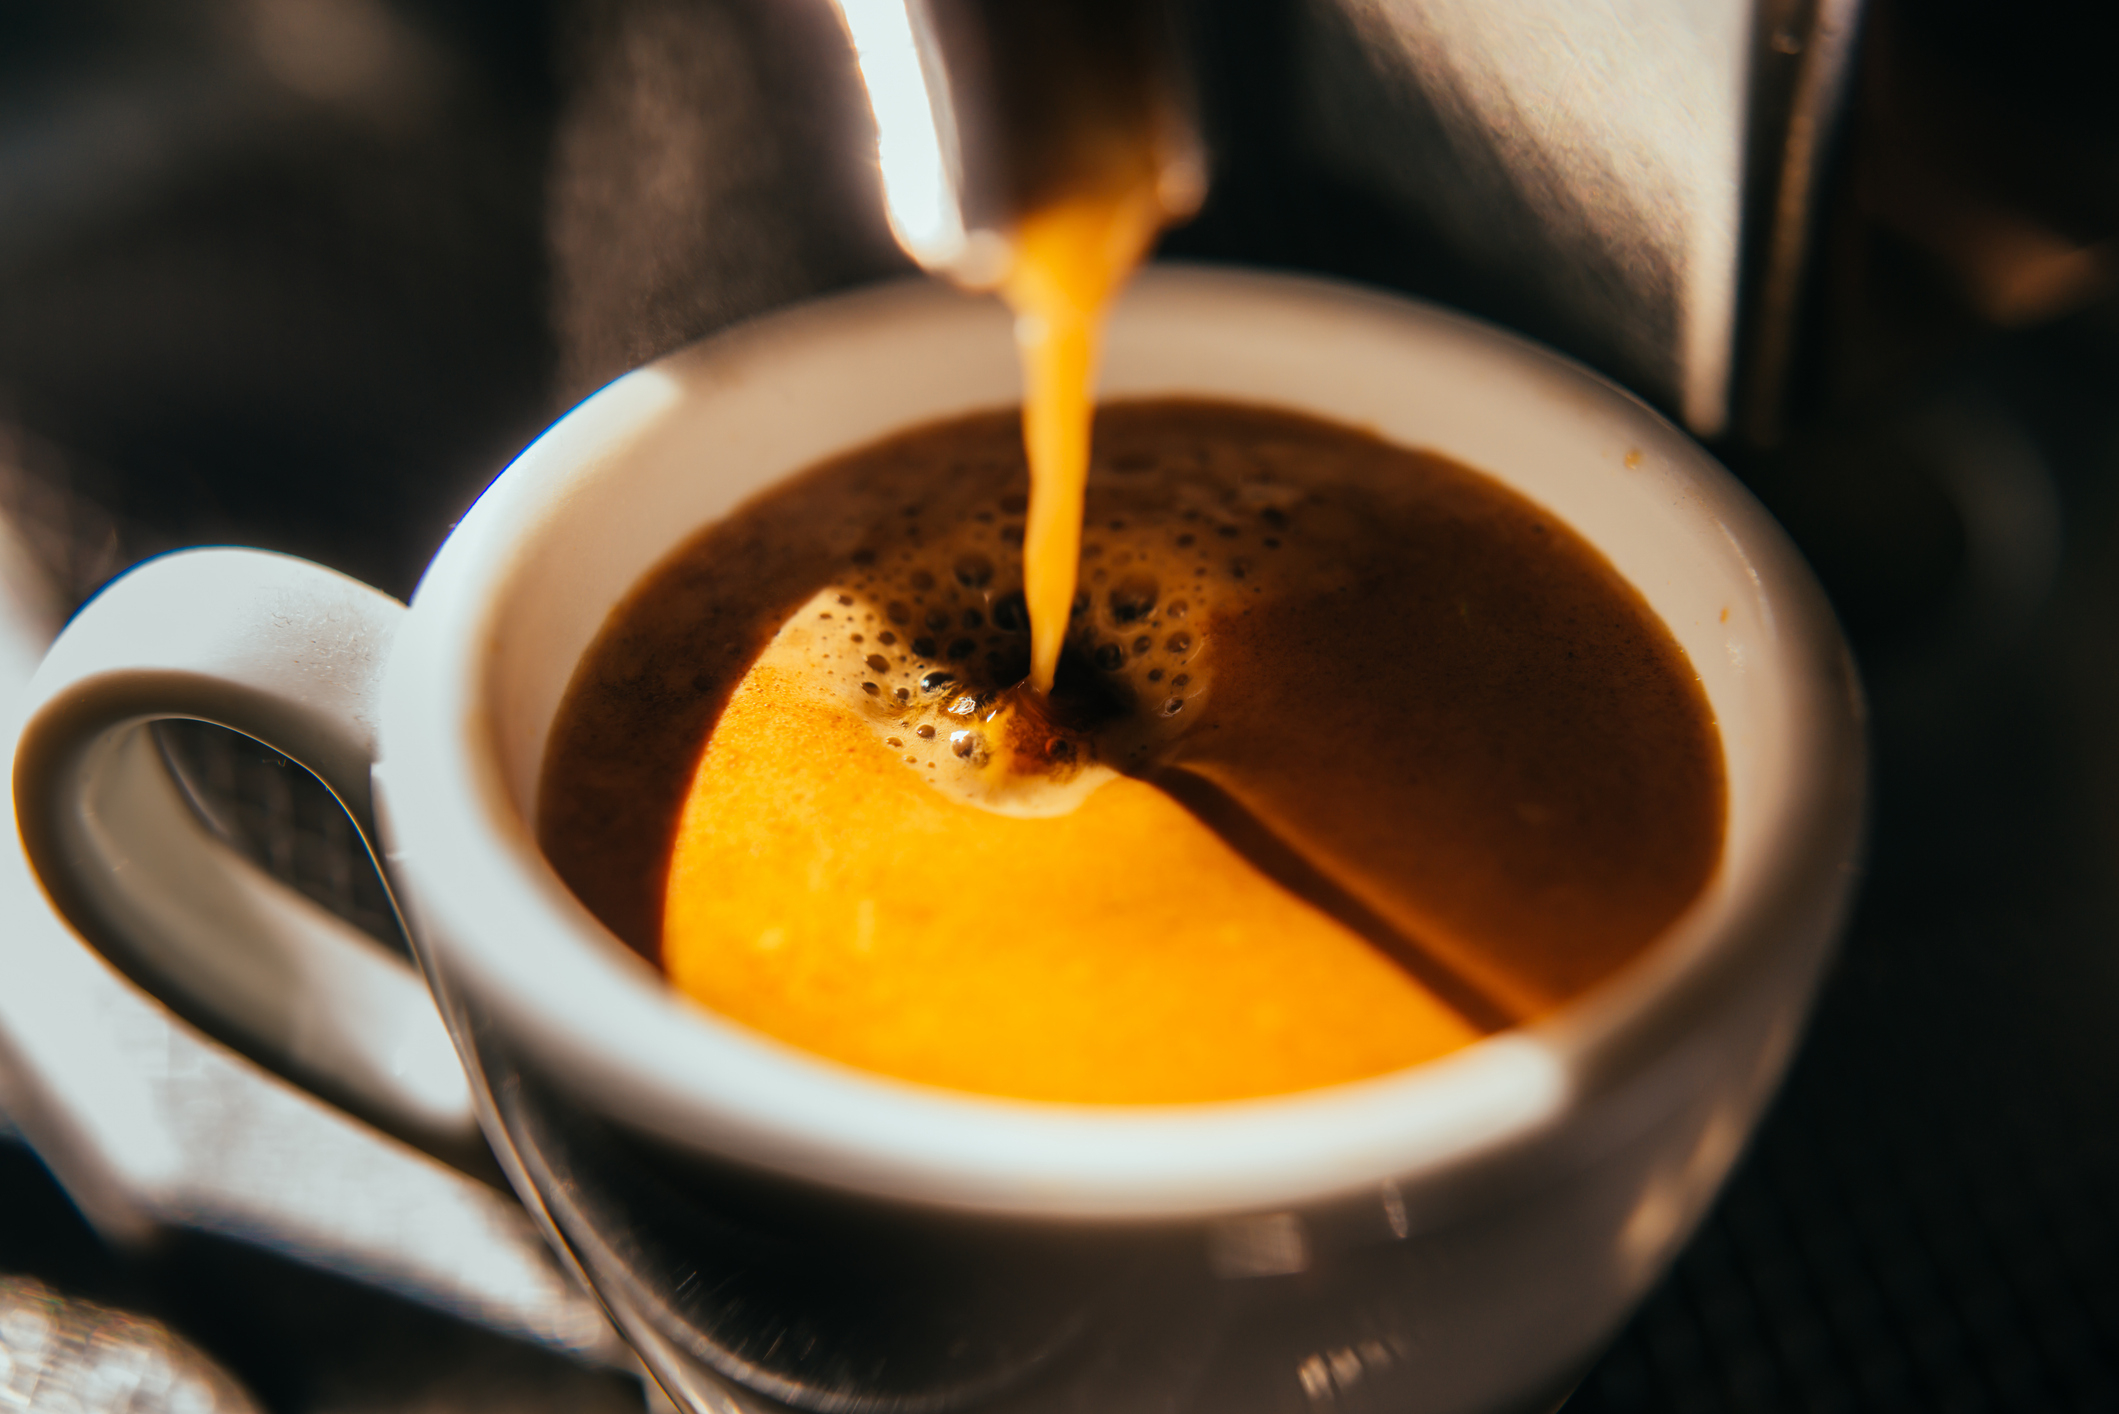 Espresso being poured into a white cup, showing the coffee&#x27;s crema